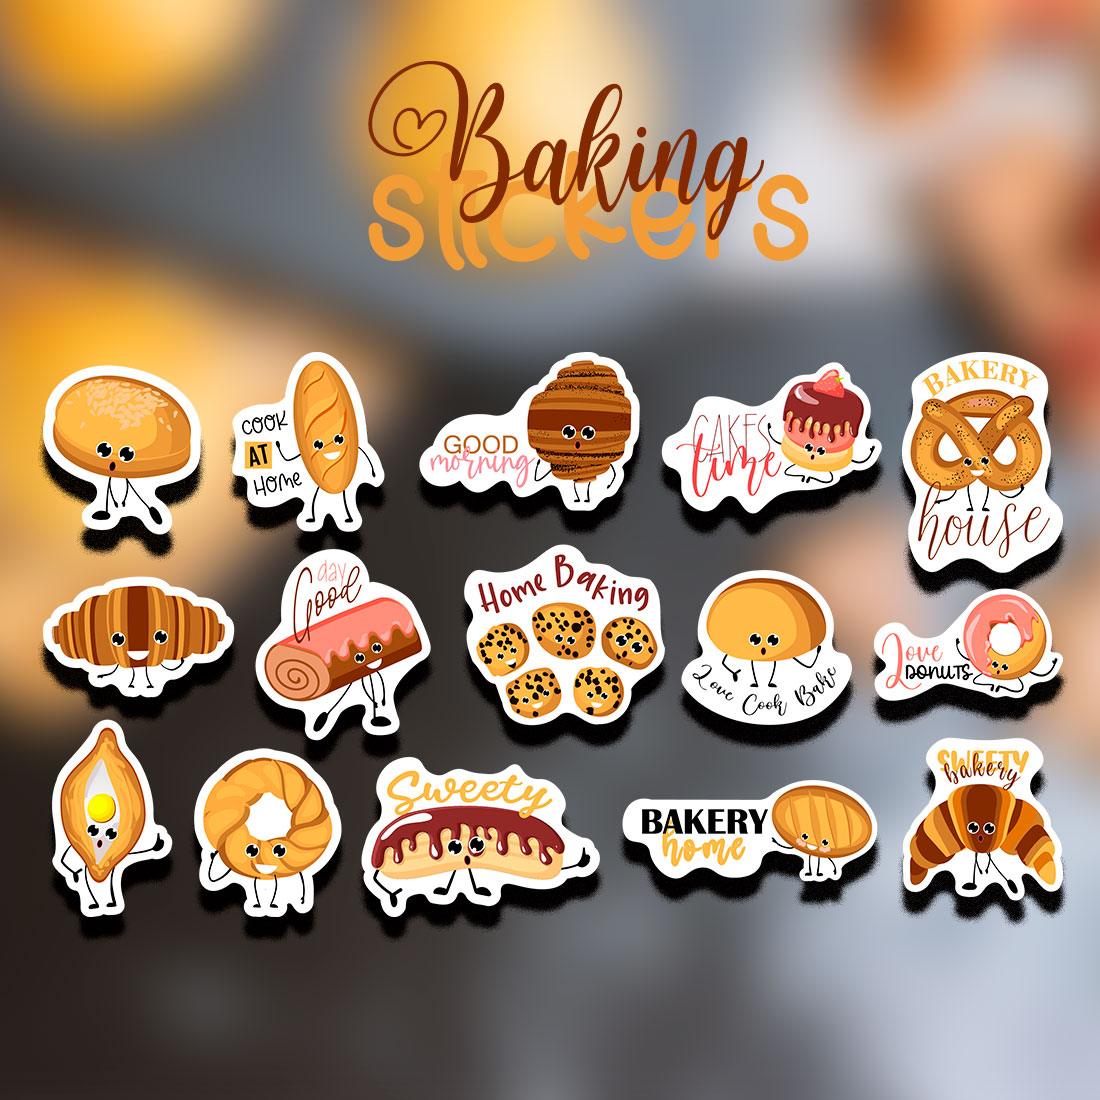 Set of stickers with pastries and bakery | 15 baking sticker designs preview image.